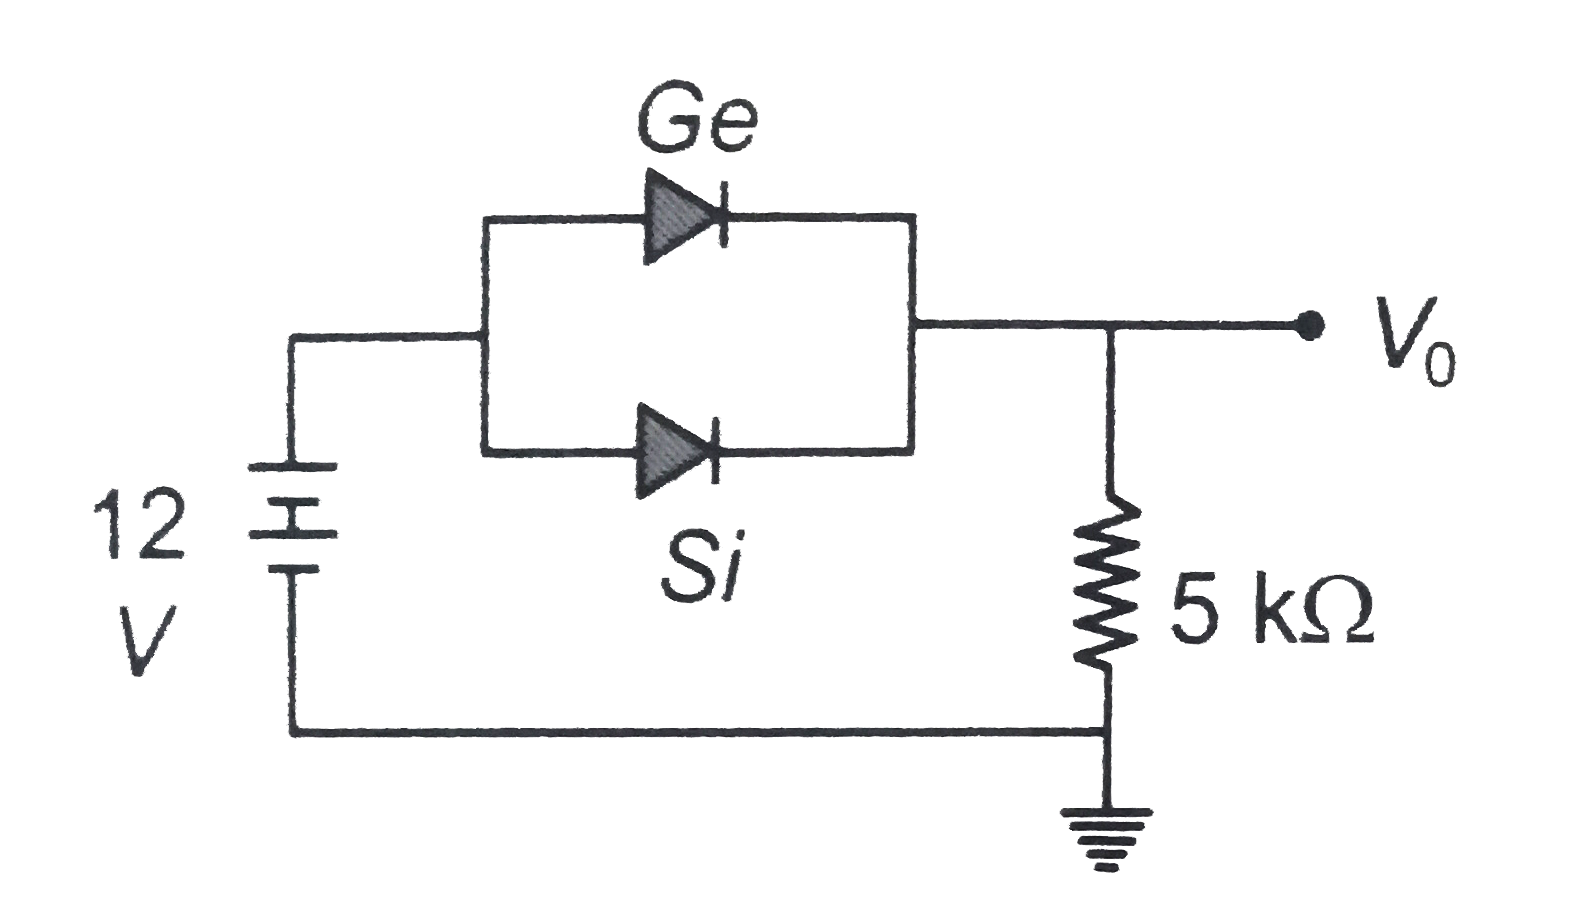 Ge and Si diodes conduct at 0.3 V and 0.7 V respectively. In the following figure if Ge diode connection are reversed, the value of V(0) changes by